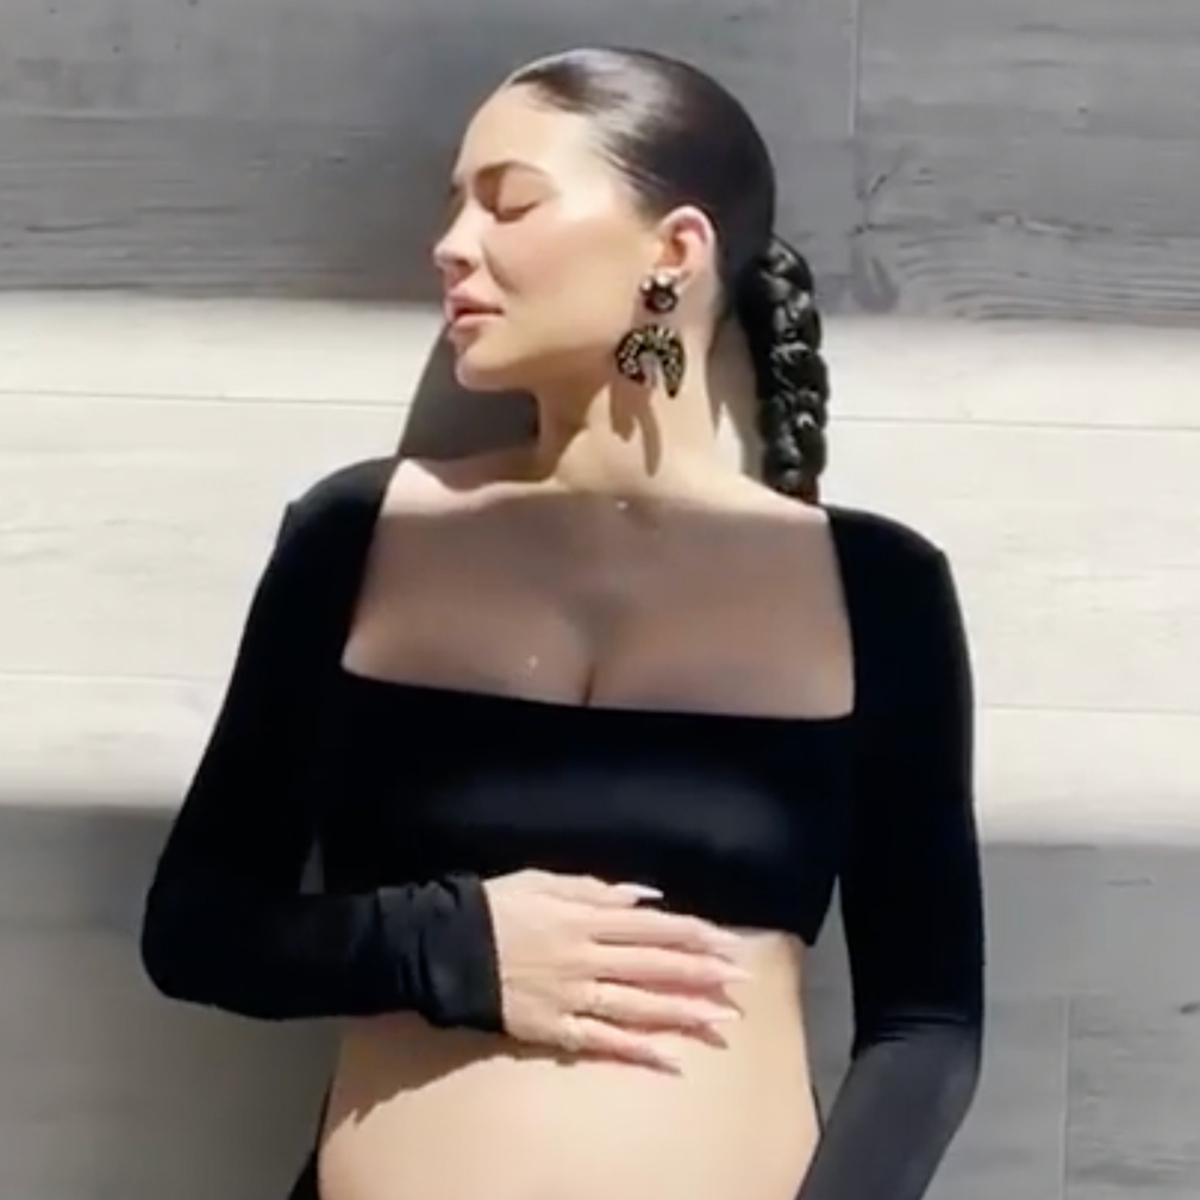 Kylie Jenner Made a Case for Wearing a Crop Top While Pregnant